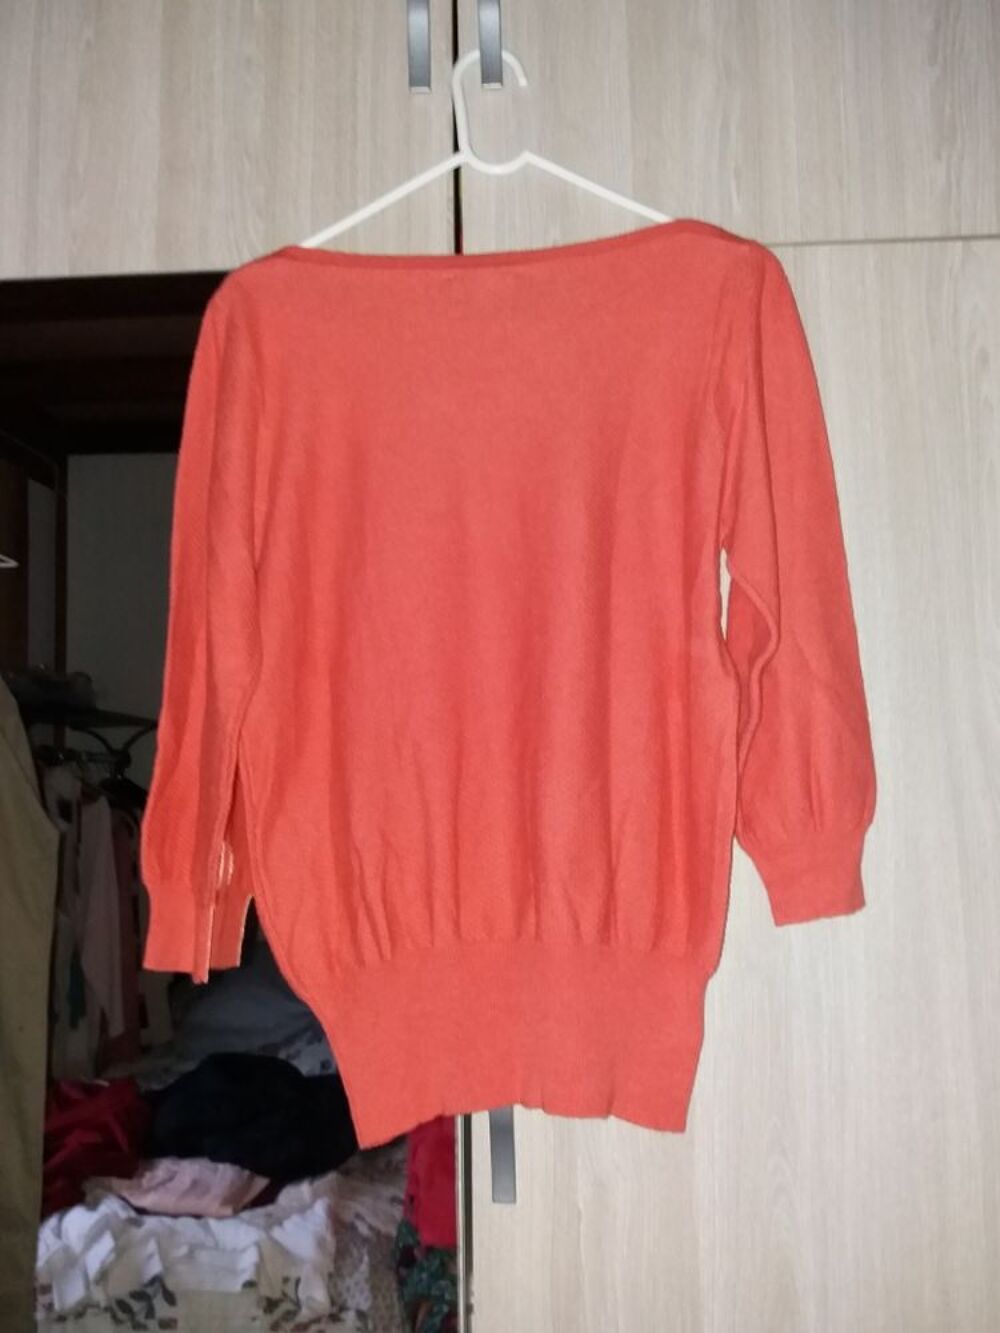 Pull couleur corail manches 3/4 taille 4 marque Zamba. Vtements